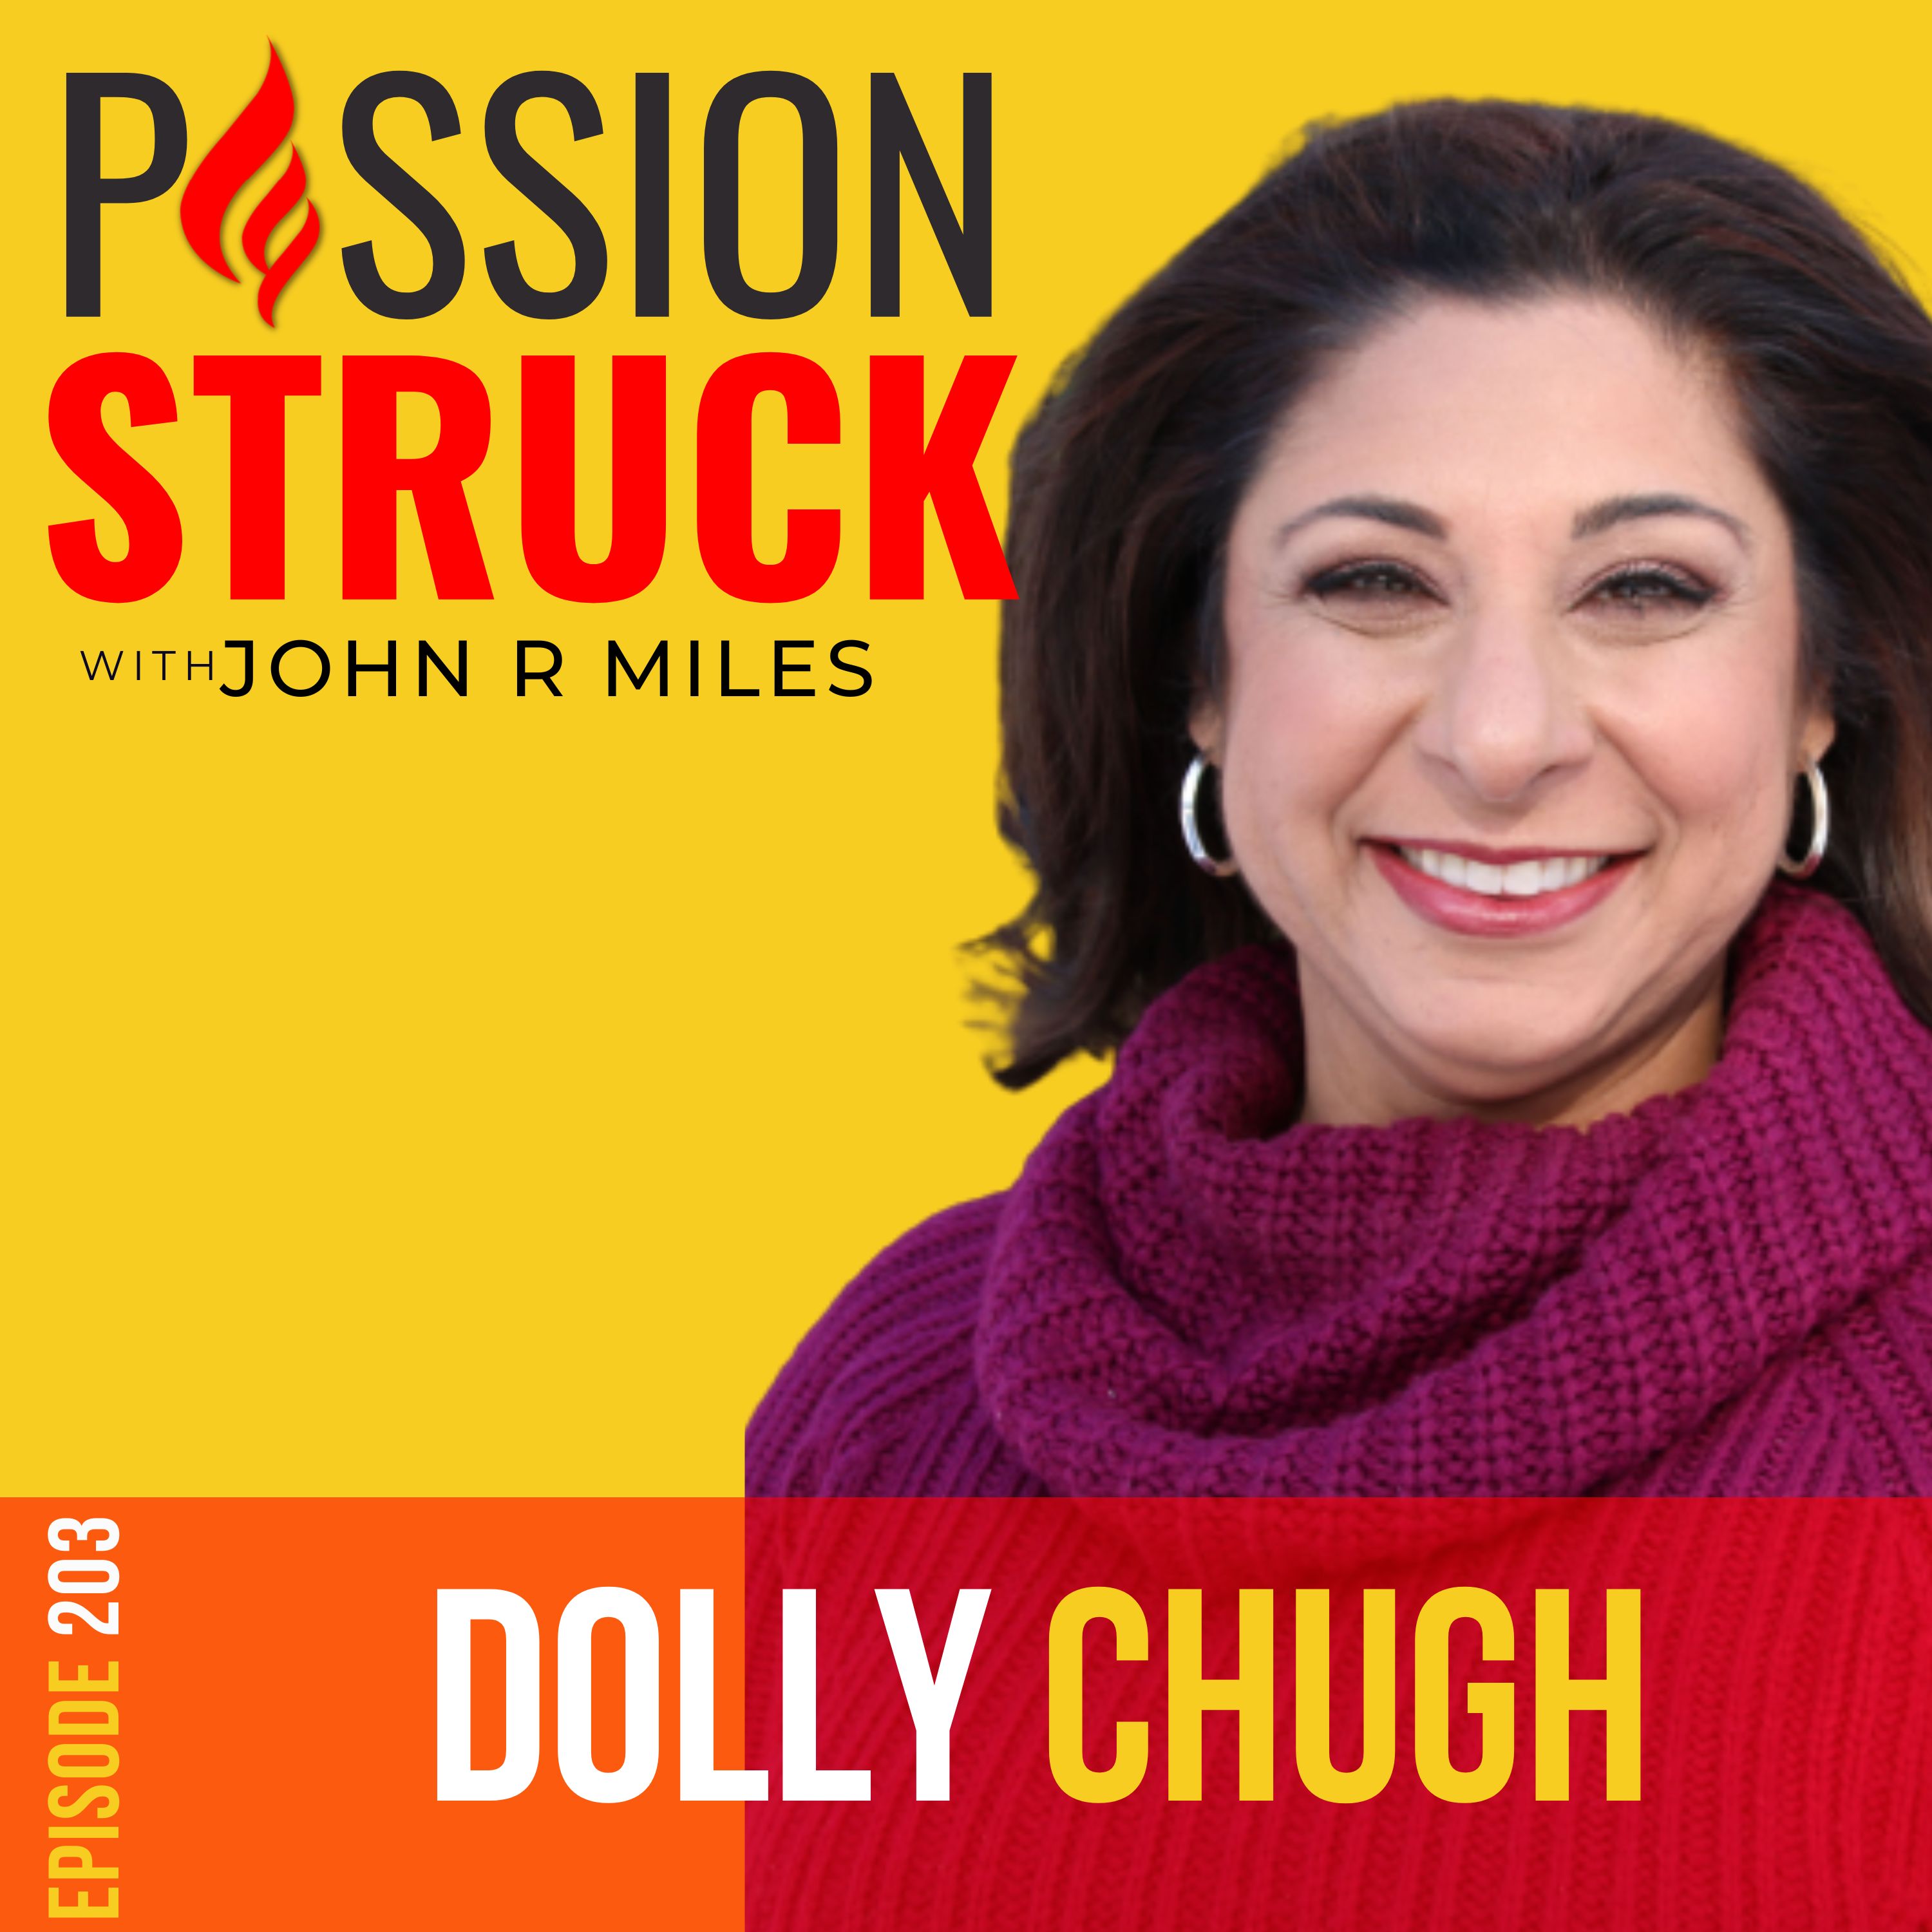 Passion Struck podcast album cover episode 203 with Dolly Chugh on creating a more just future